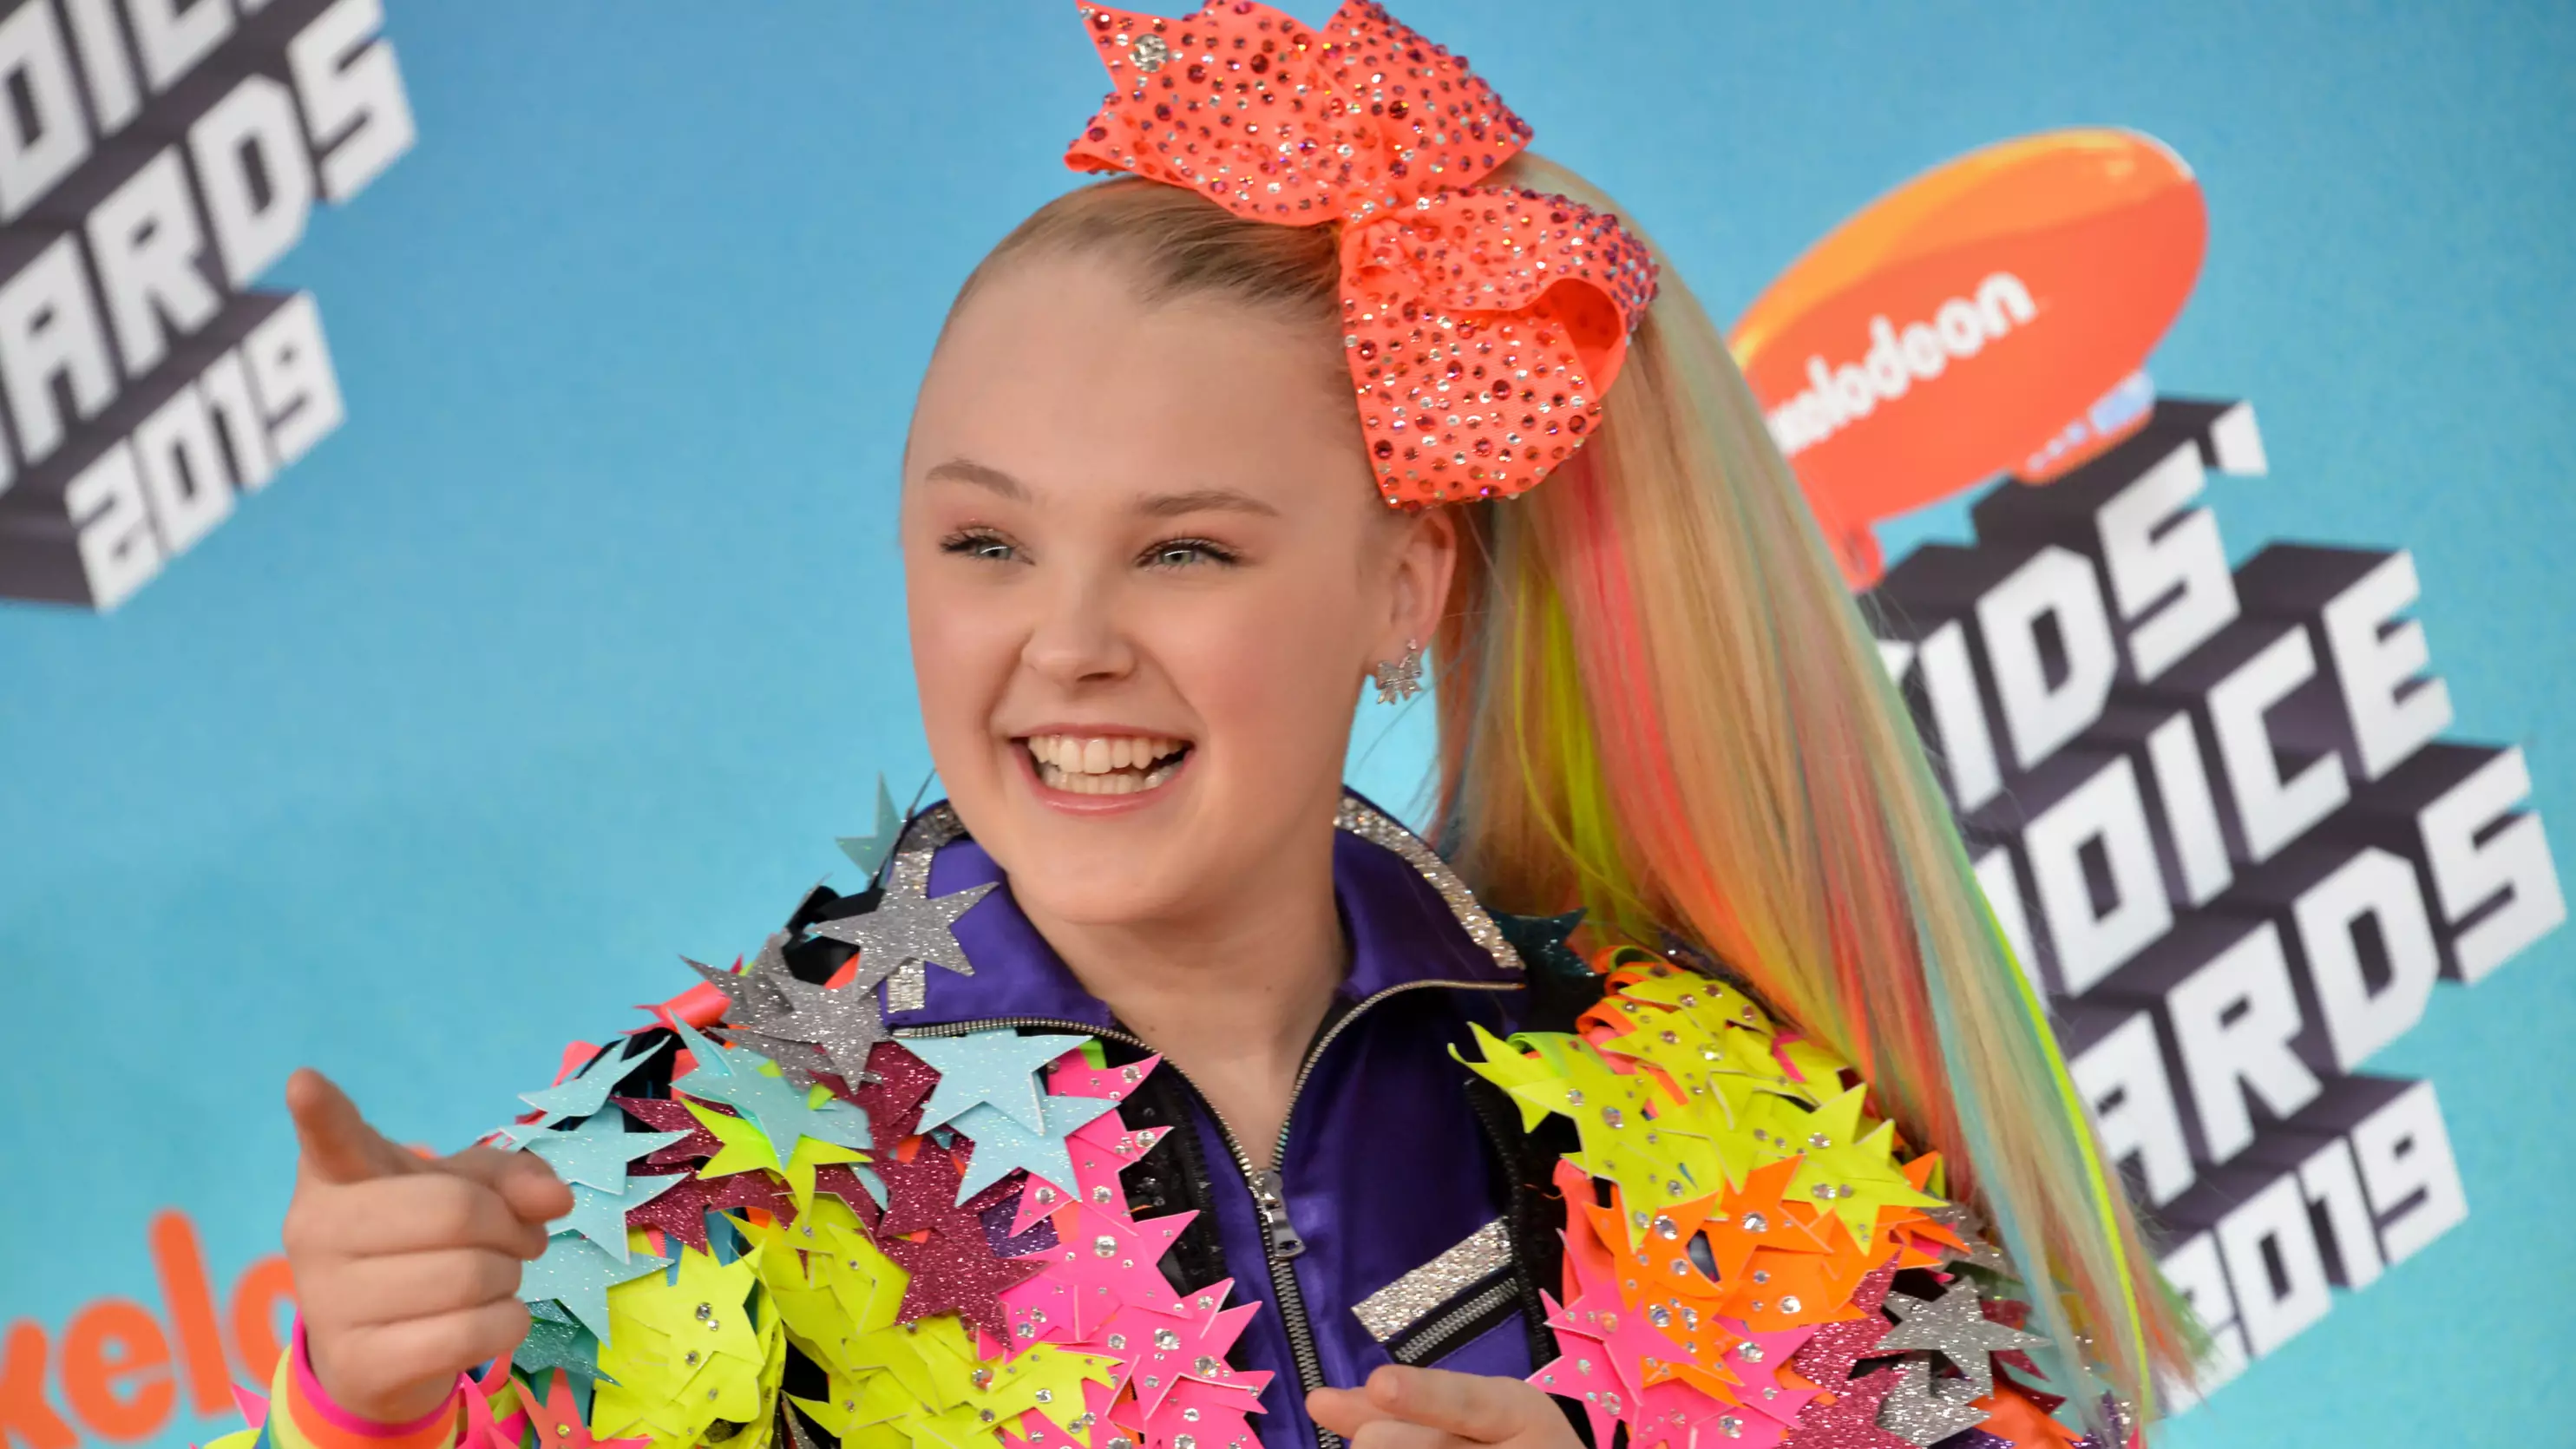 YouTuber JoJo Siwa Was 'Swatted' After Coming Out As Gay